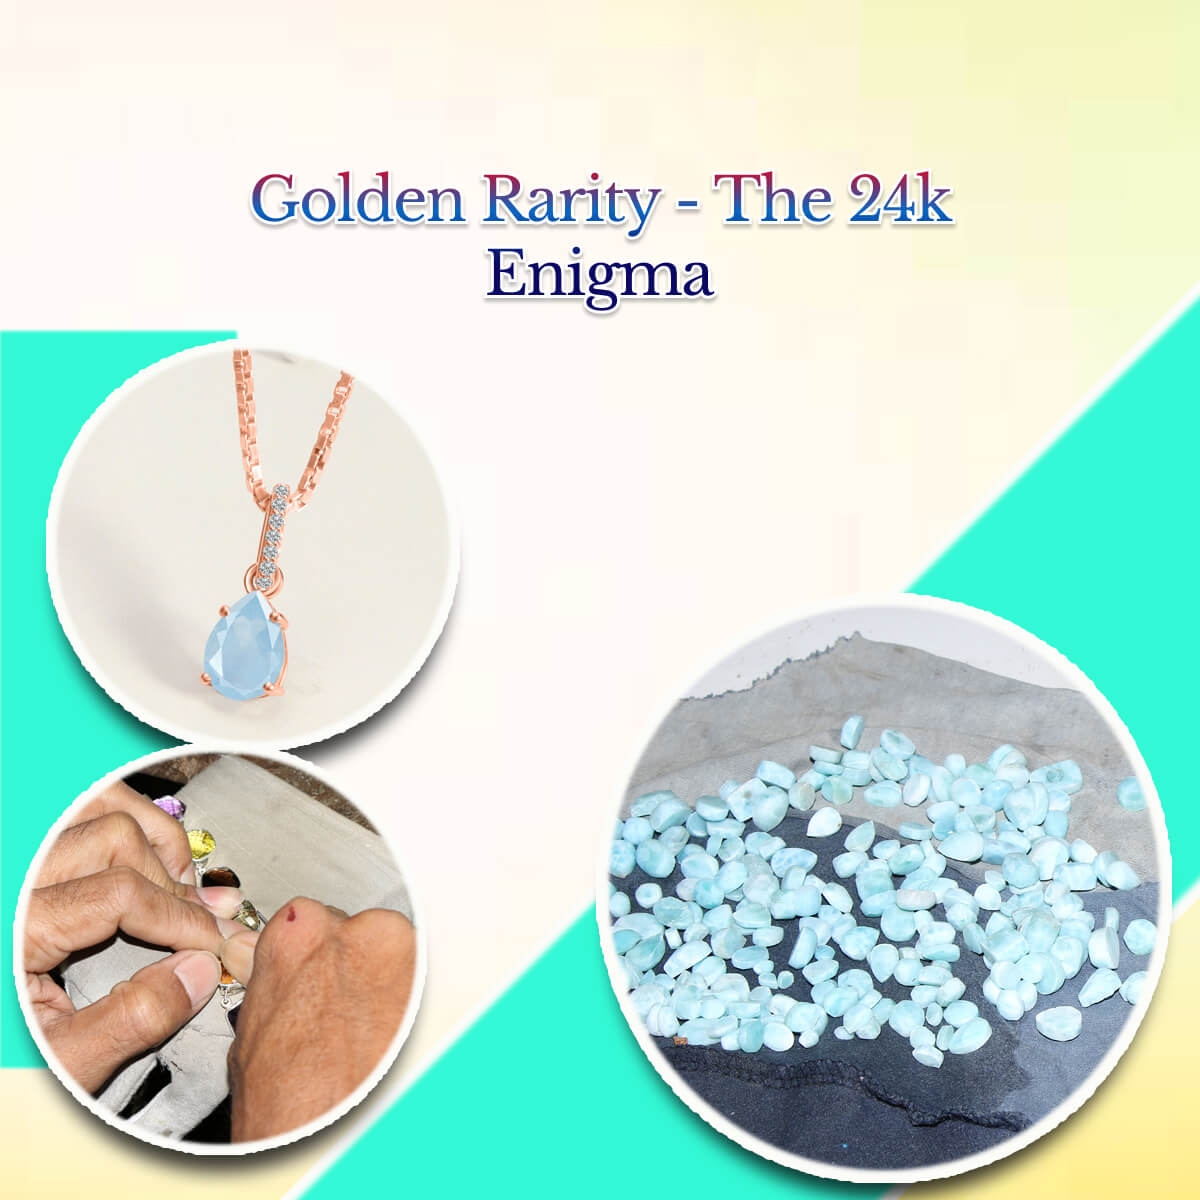 A Side Note: Why is 24k Gold Rarely Used?